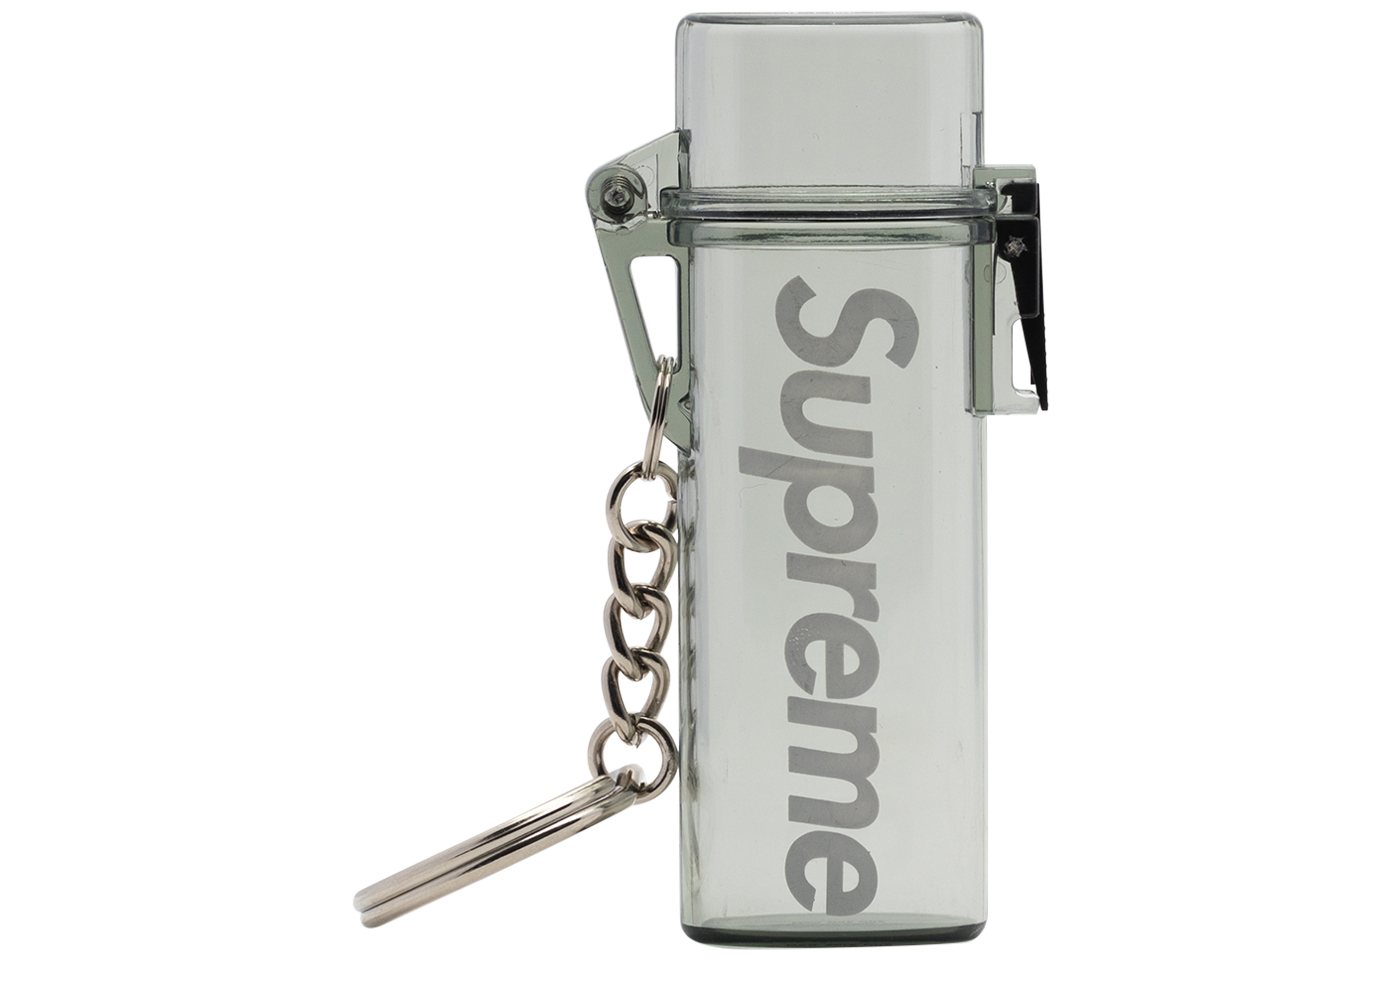 Supreme Waterproof Lighter Case Keychain Clear - SS20 - US